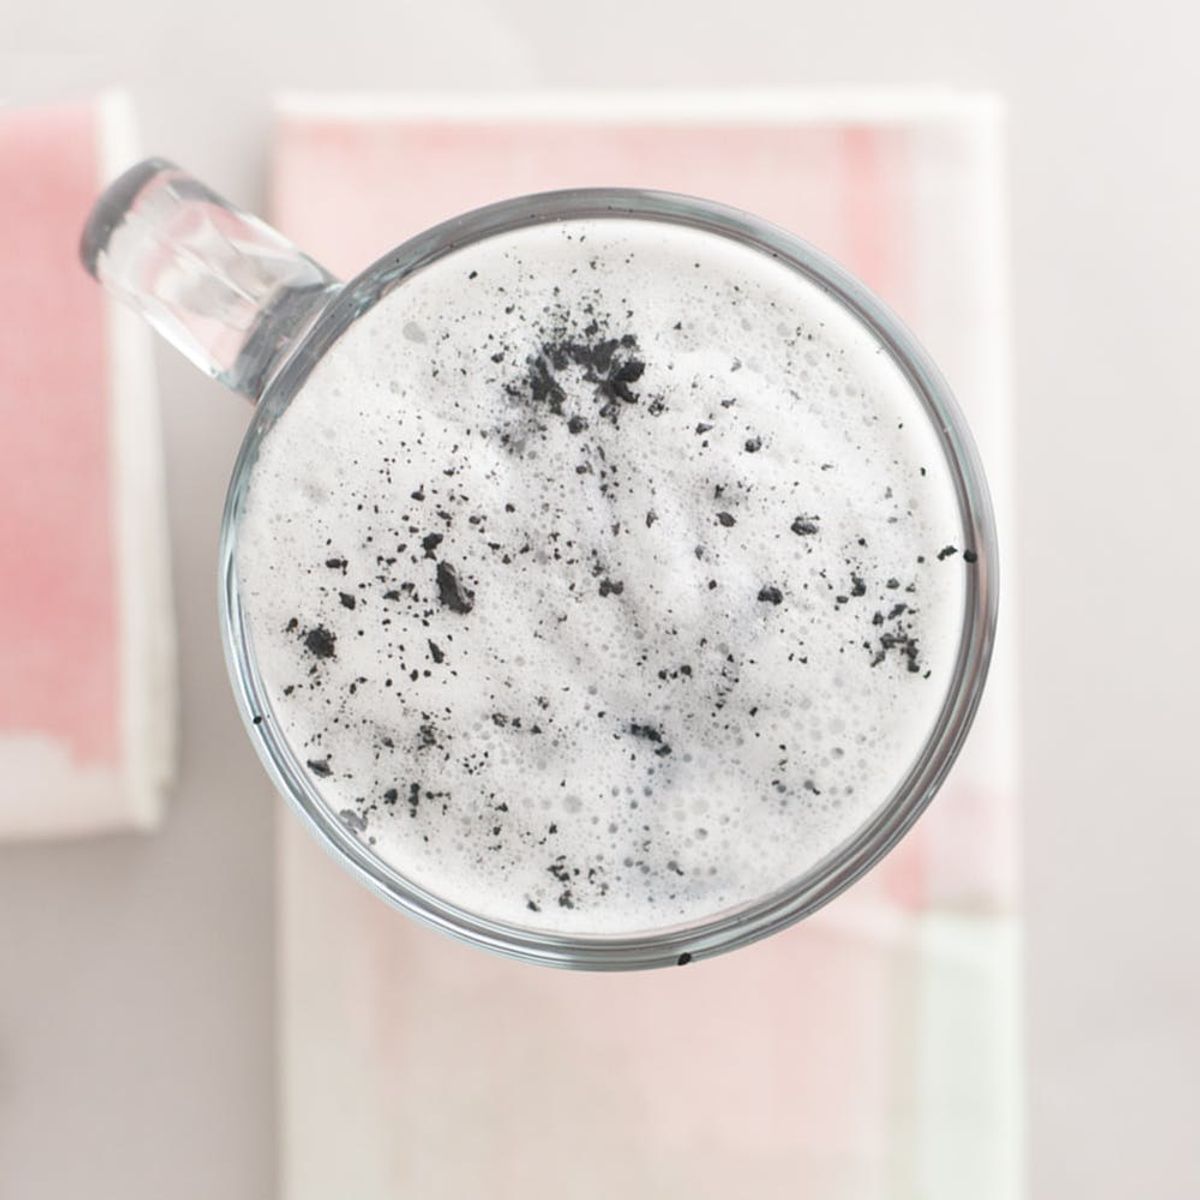 Taste Why This Charcoal Lattes Recipe Is the Next Big Thing